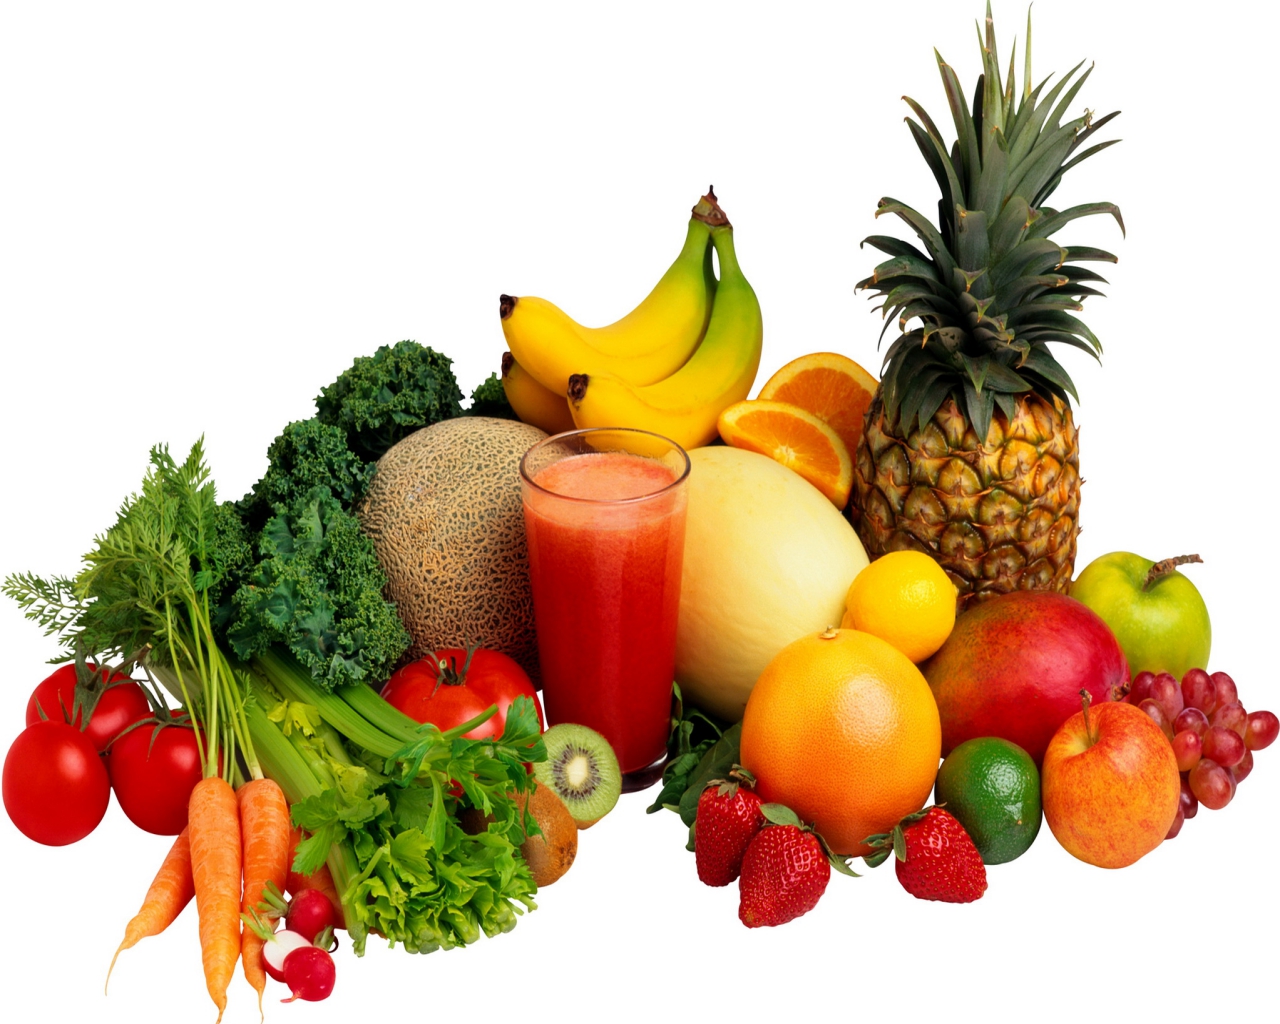 Fruits and vegetables contains plenty of nutrients which are useful for Hypothalamus.